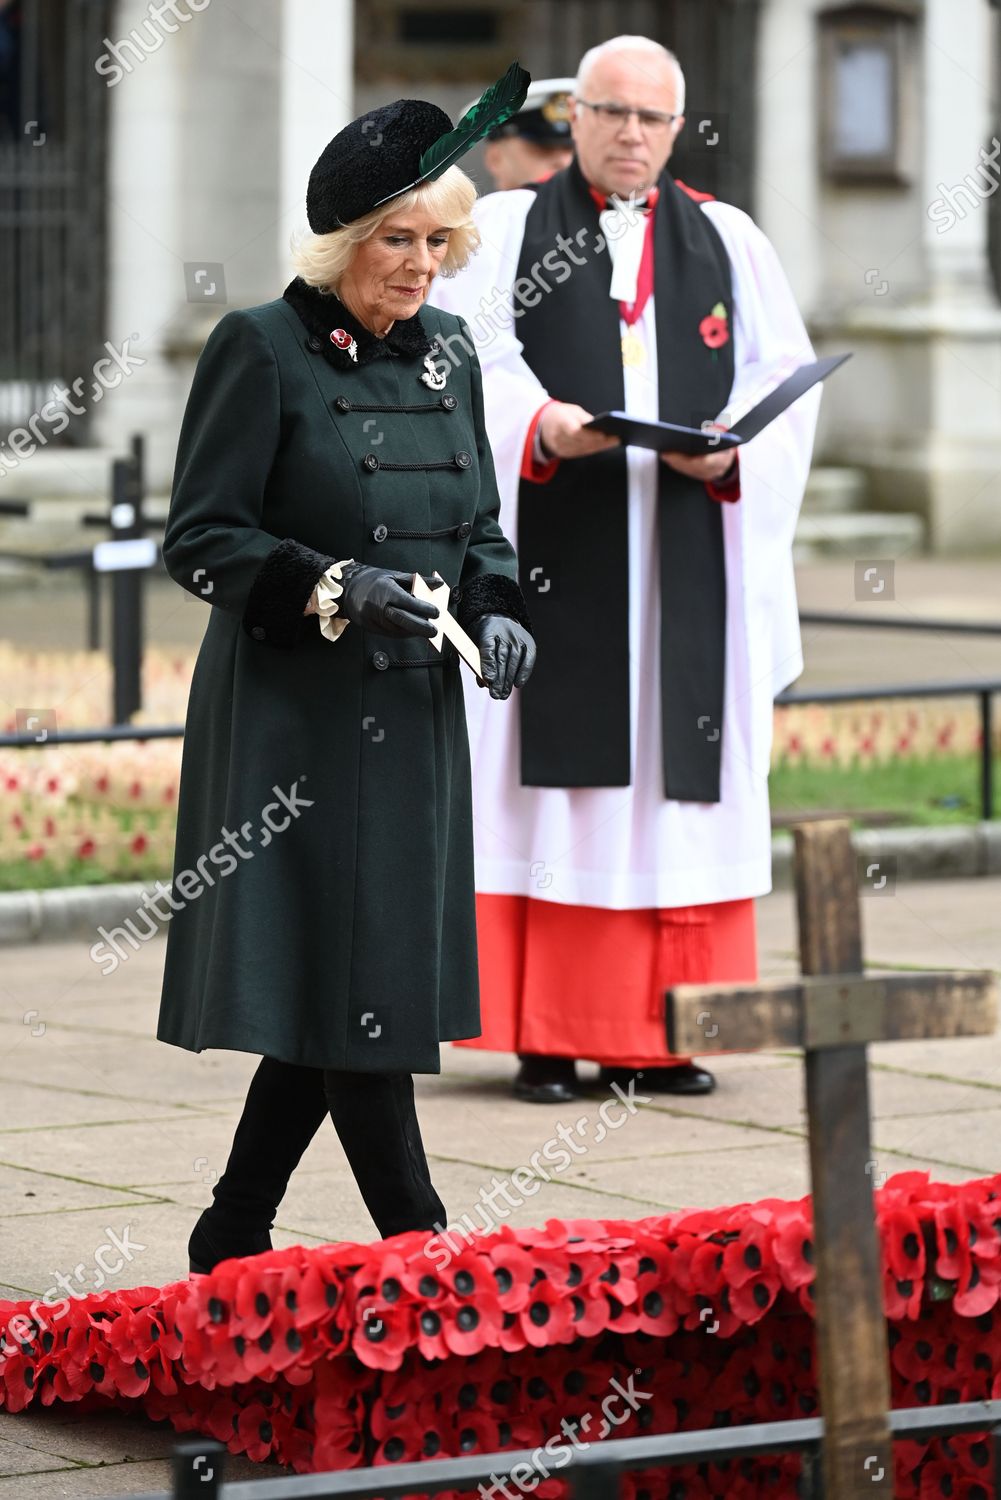 camilla-duchess-of-cornwall-attends-92nd-field-of-remembrance-at-westminster-abbey-london-uk-shutterstock-editorial-10995712ab.jpg